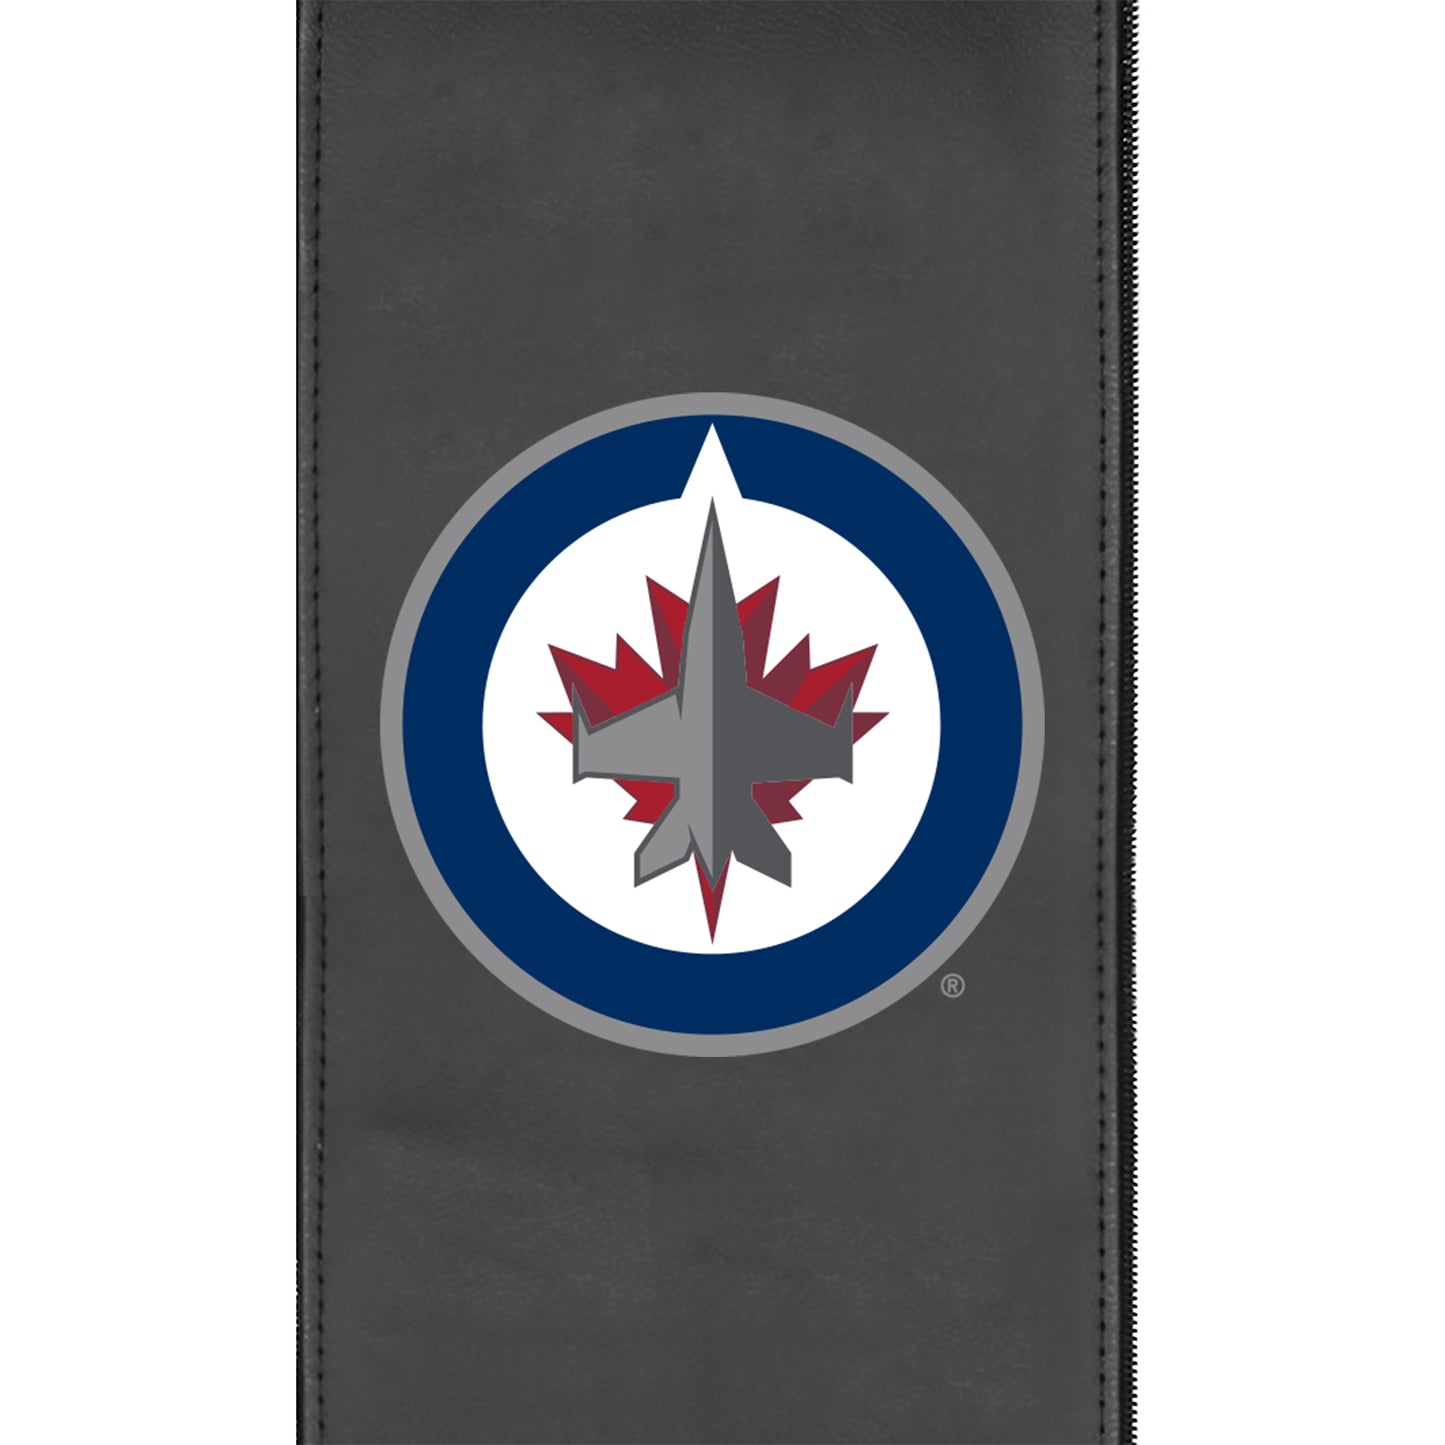 Relax Home Theater Recliner with Winnipeg Jets Logo